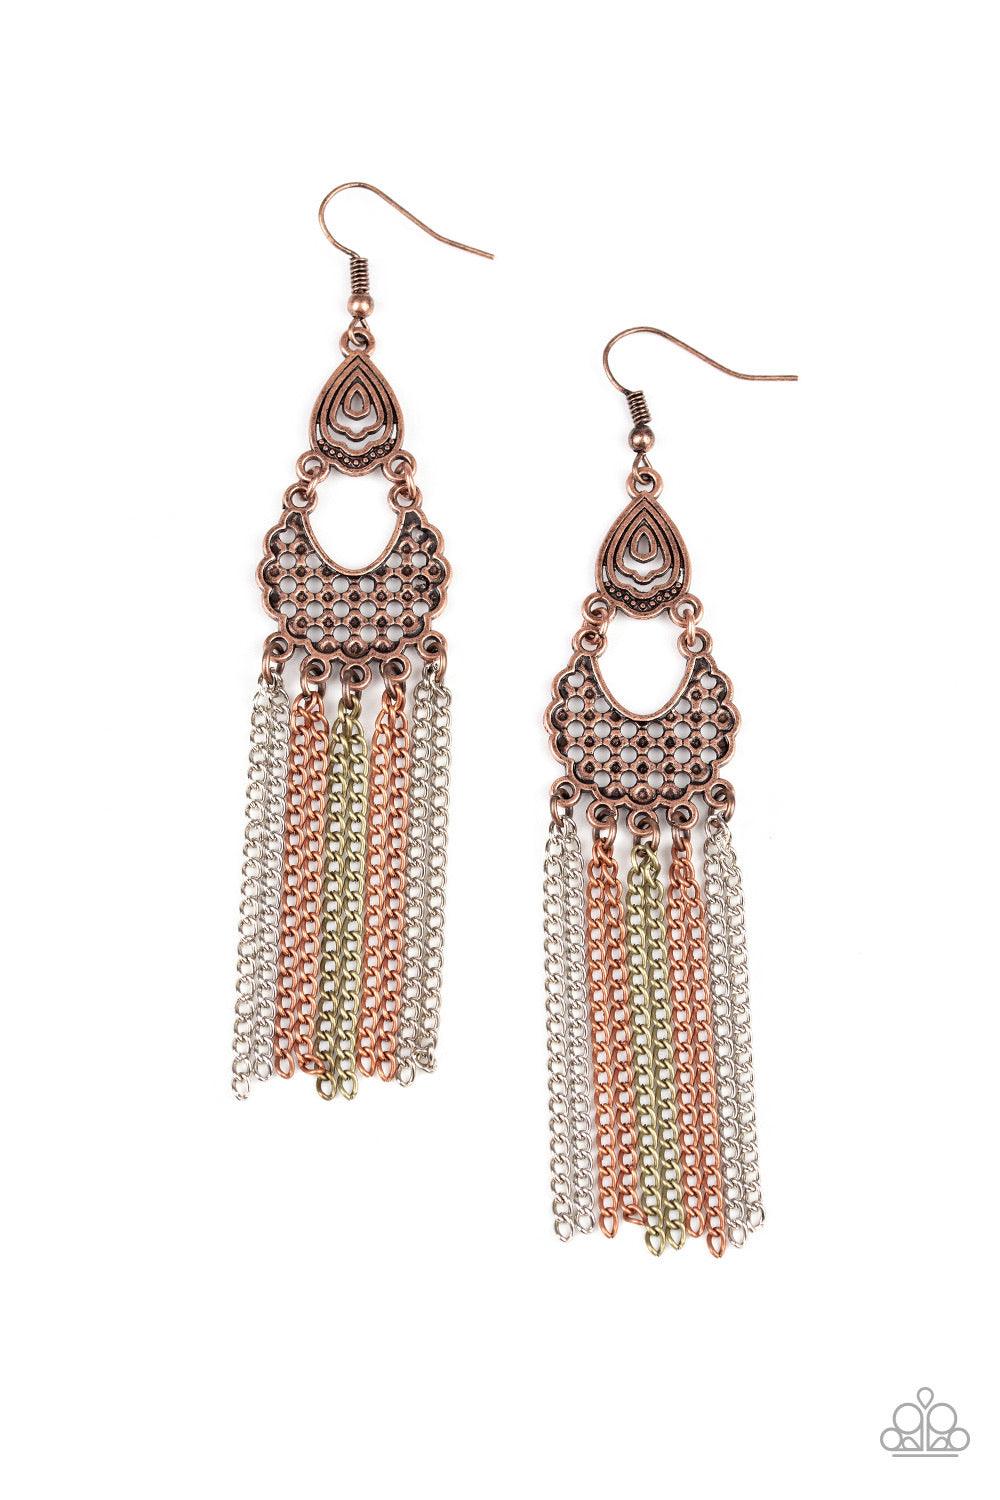 Paparazzi Accessories Insane Chain - Multi Pairs of shimmery brass, copper, and silver chains cascade from the bottom of a stacked copper lure featuring airy filigree. Earring attaches to a standard fishhook fitting. Jewelry